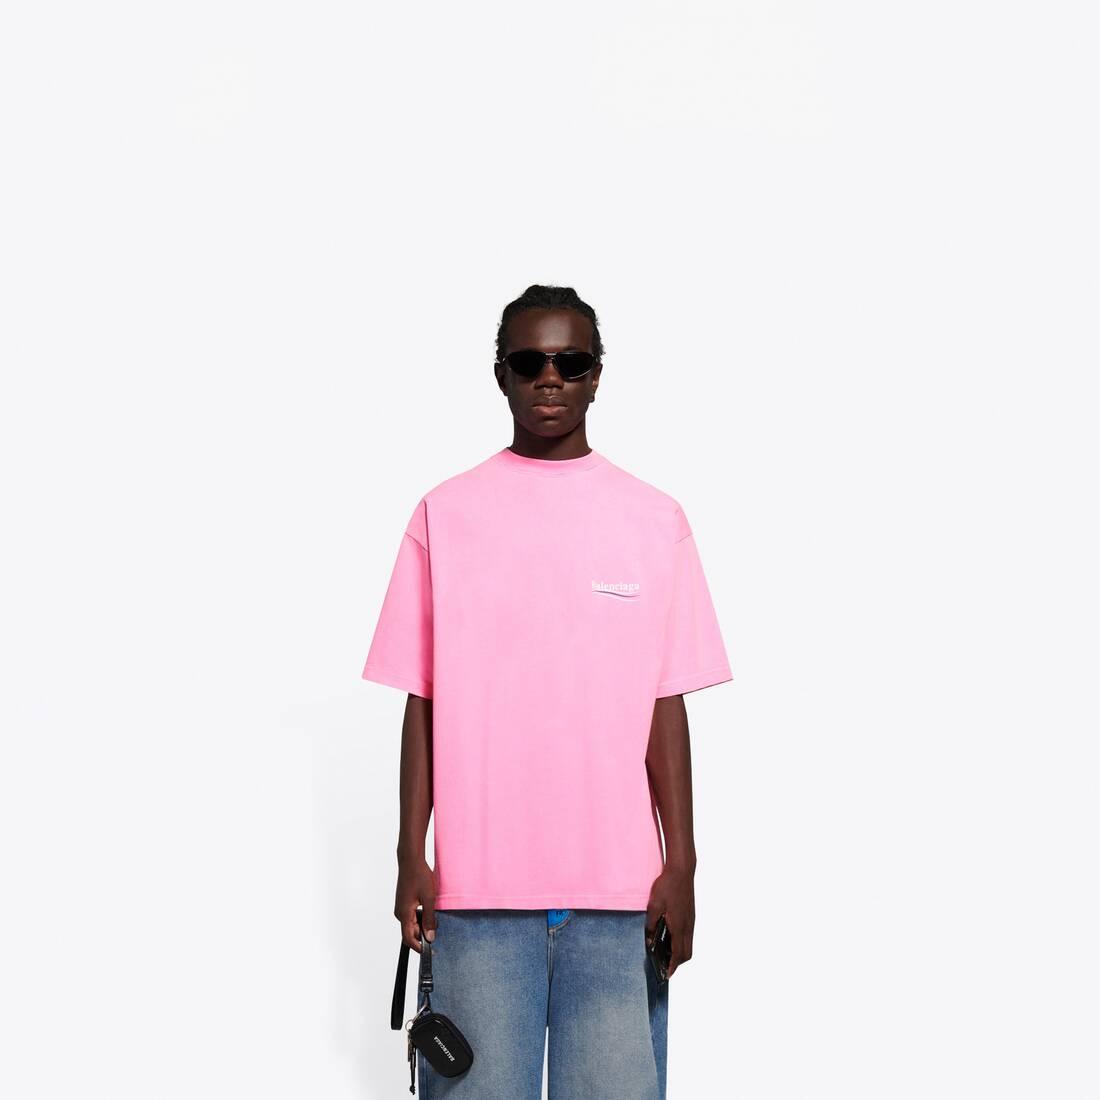 Balenciaga Political Campaign Large Fit T-shirt in Pink for Men | Lyst